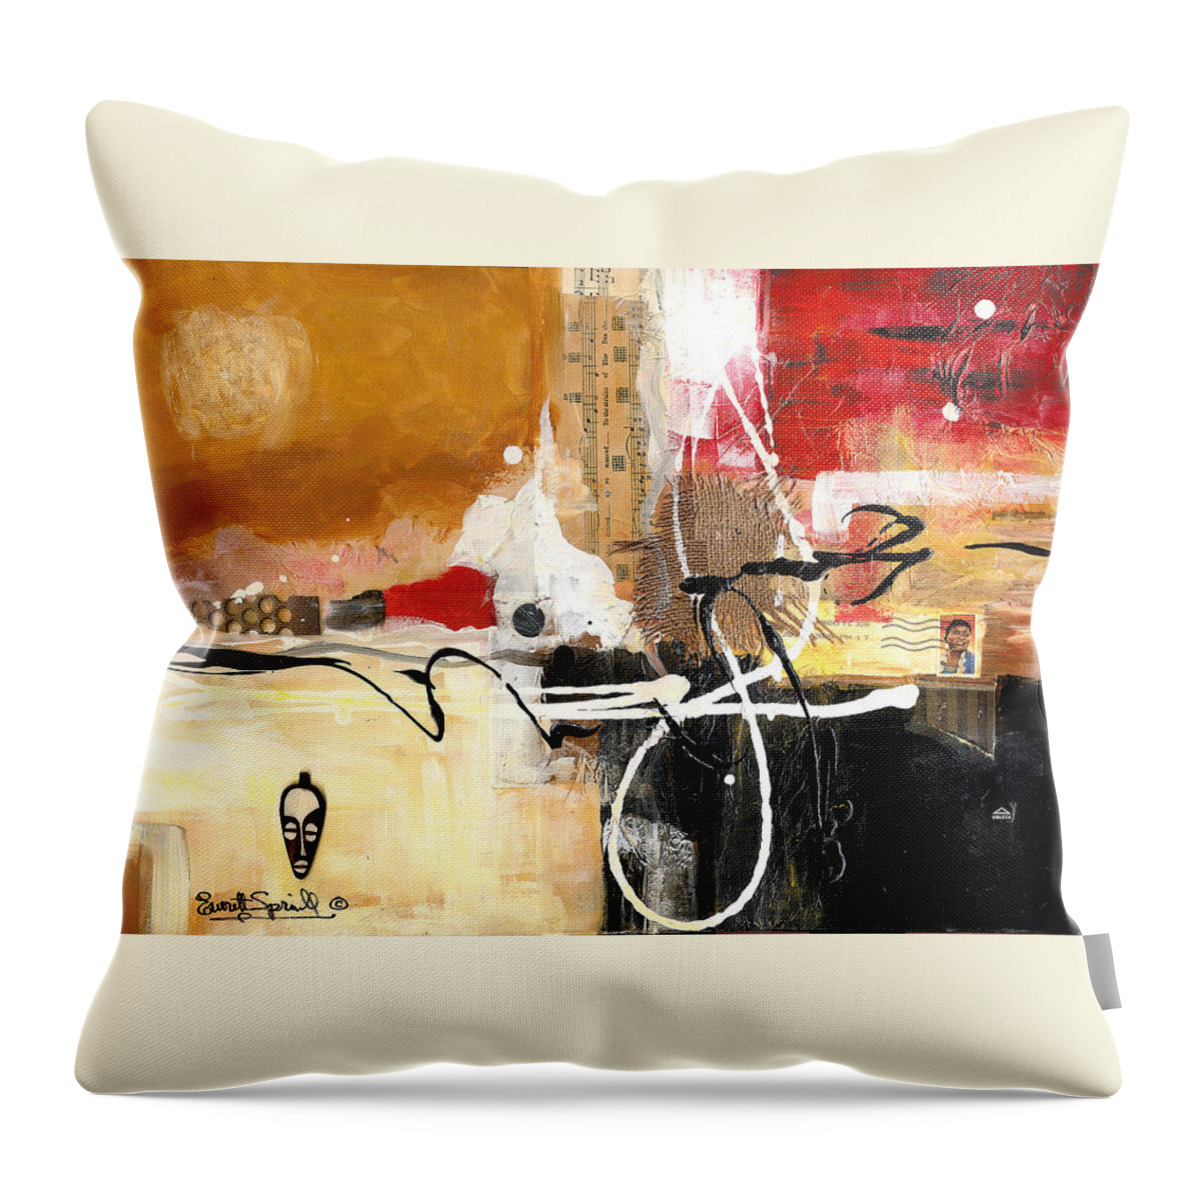 Everett Spruill Throw Pillow featuring the painting Cultural Abstractions - Hattie McDaniels by Everett Spruill